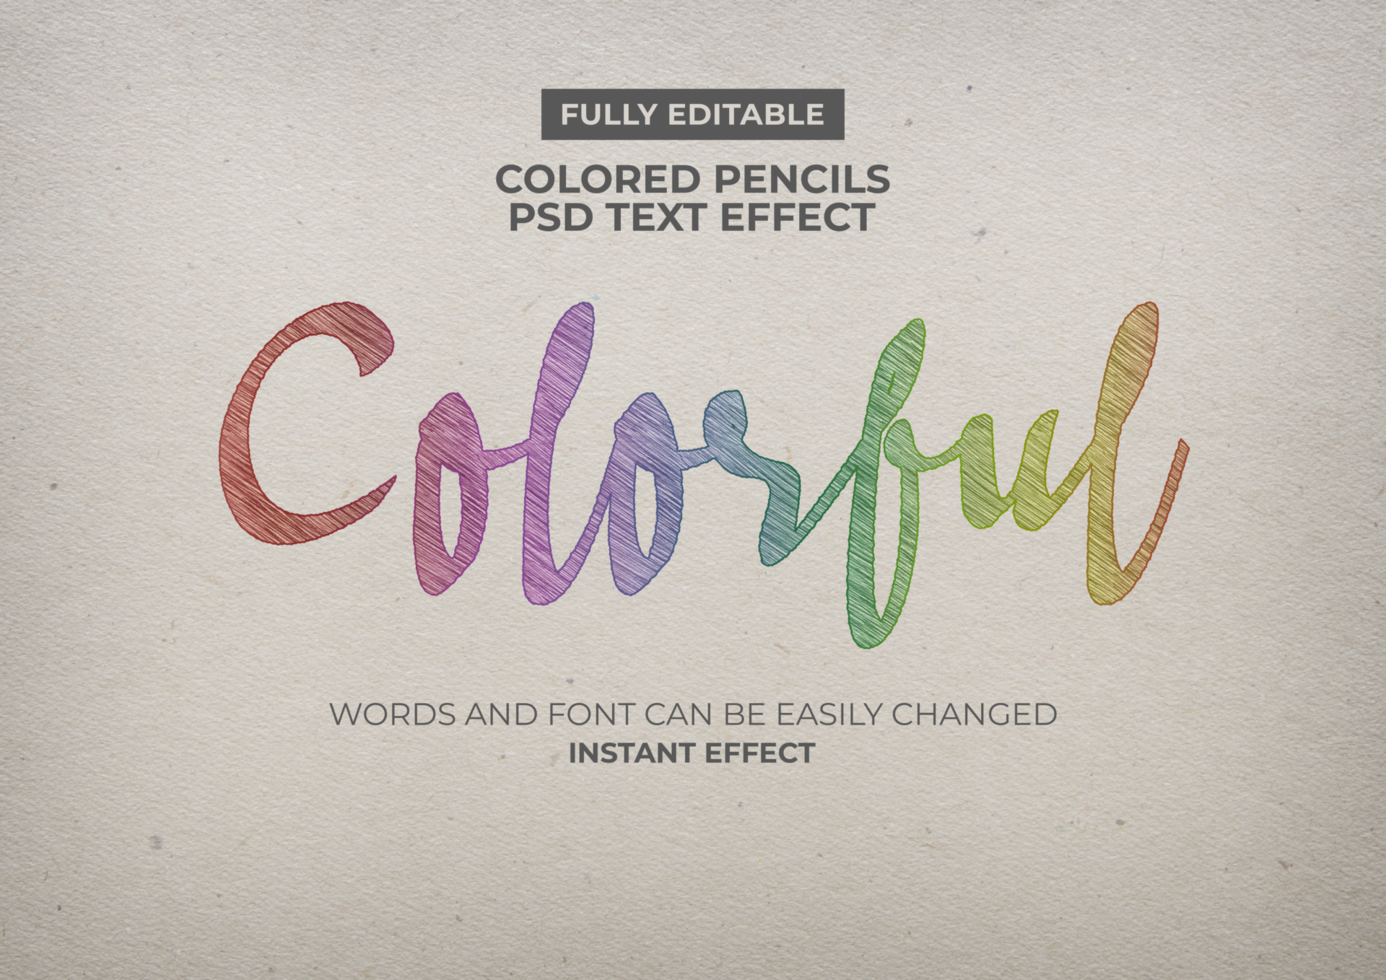 Colored pencils Text Effect psd